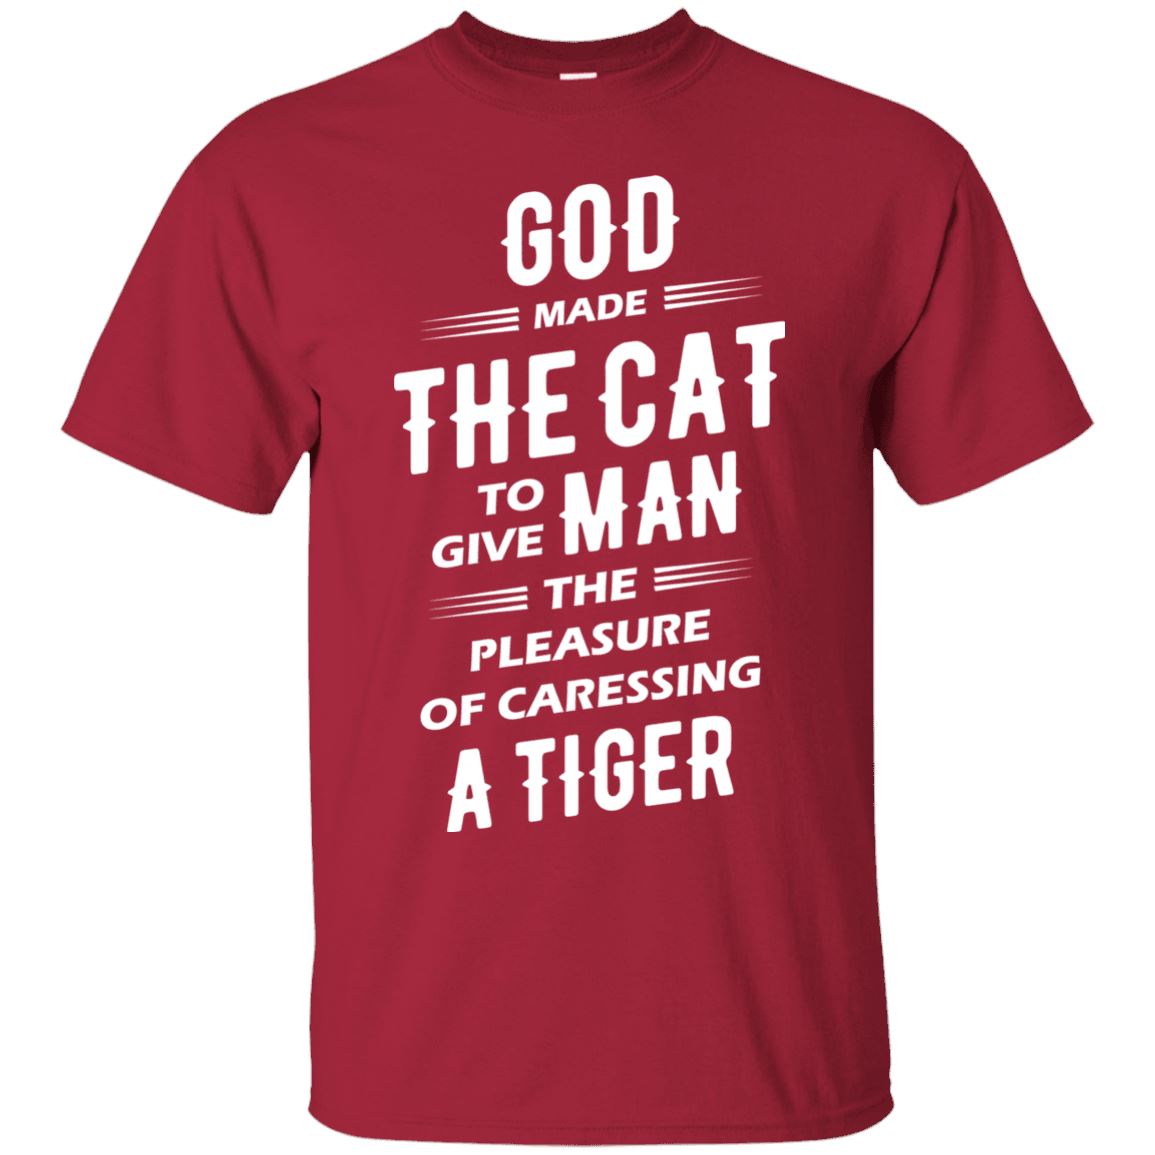 God Made The Cat To Give Men The Pleasure Of Caressing A Tiger - Cat Shirt